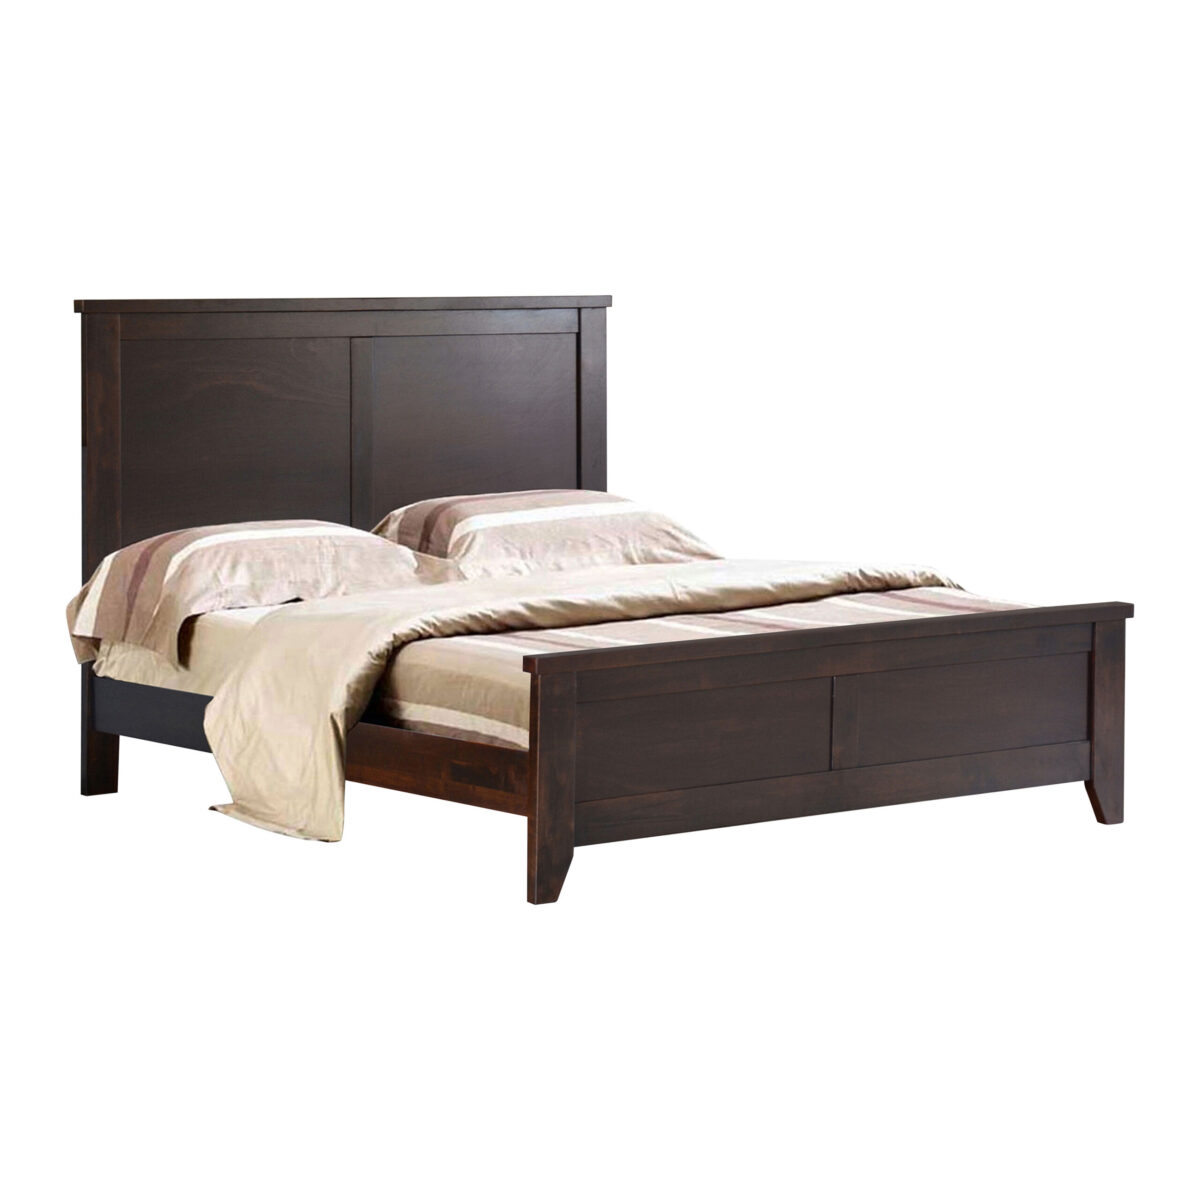 A queen size bed brown in color with foam and pillows